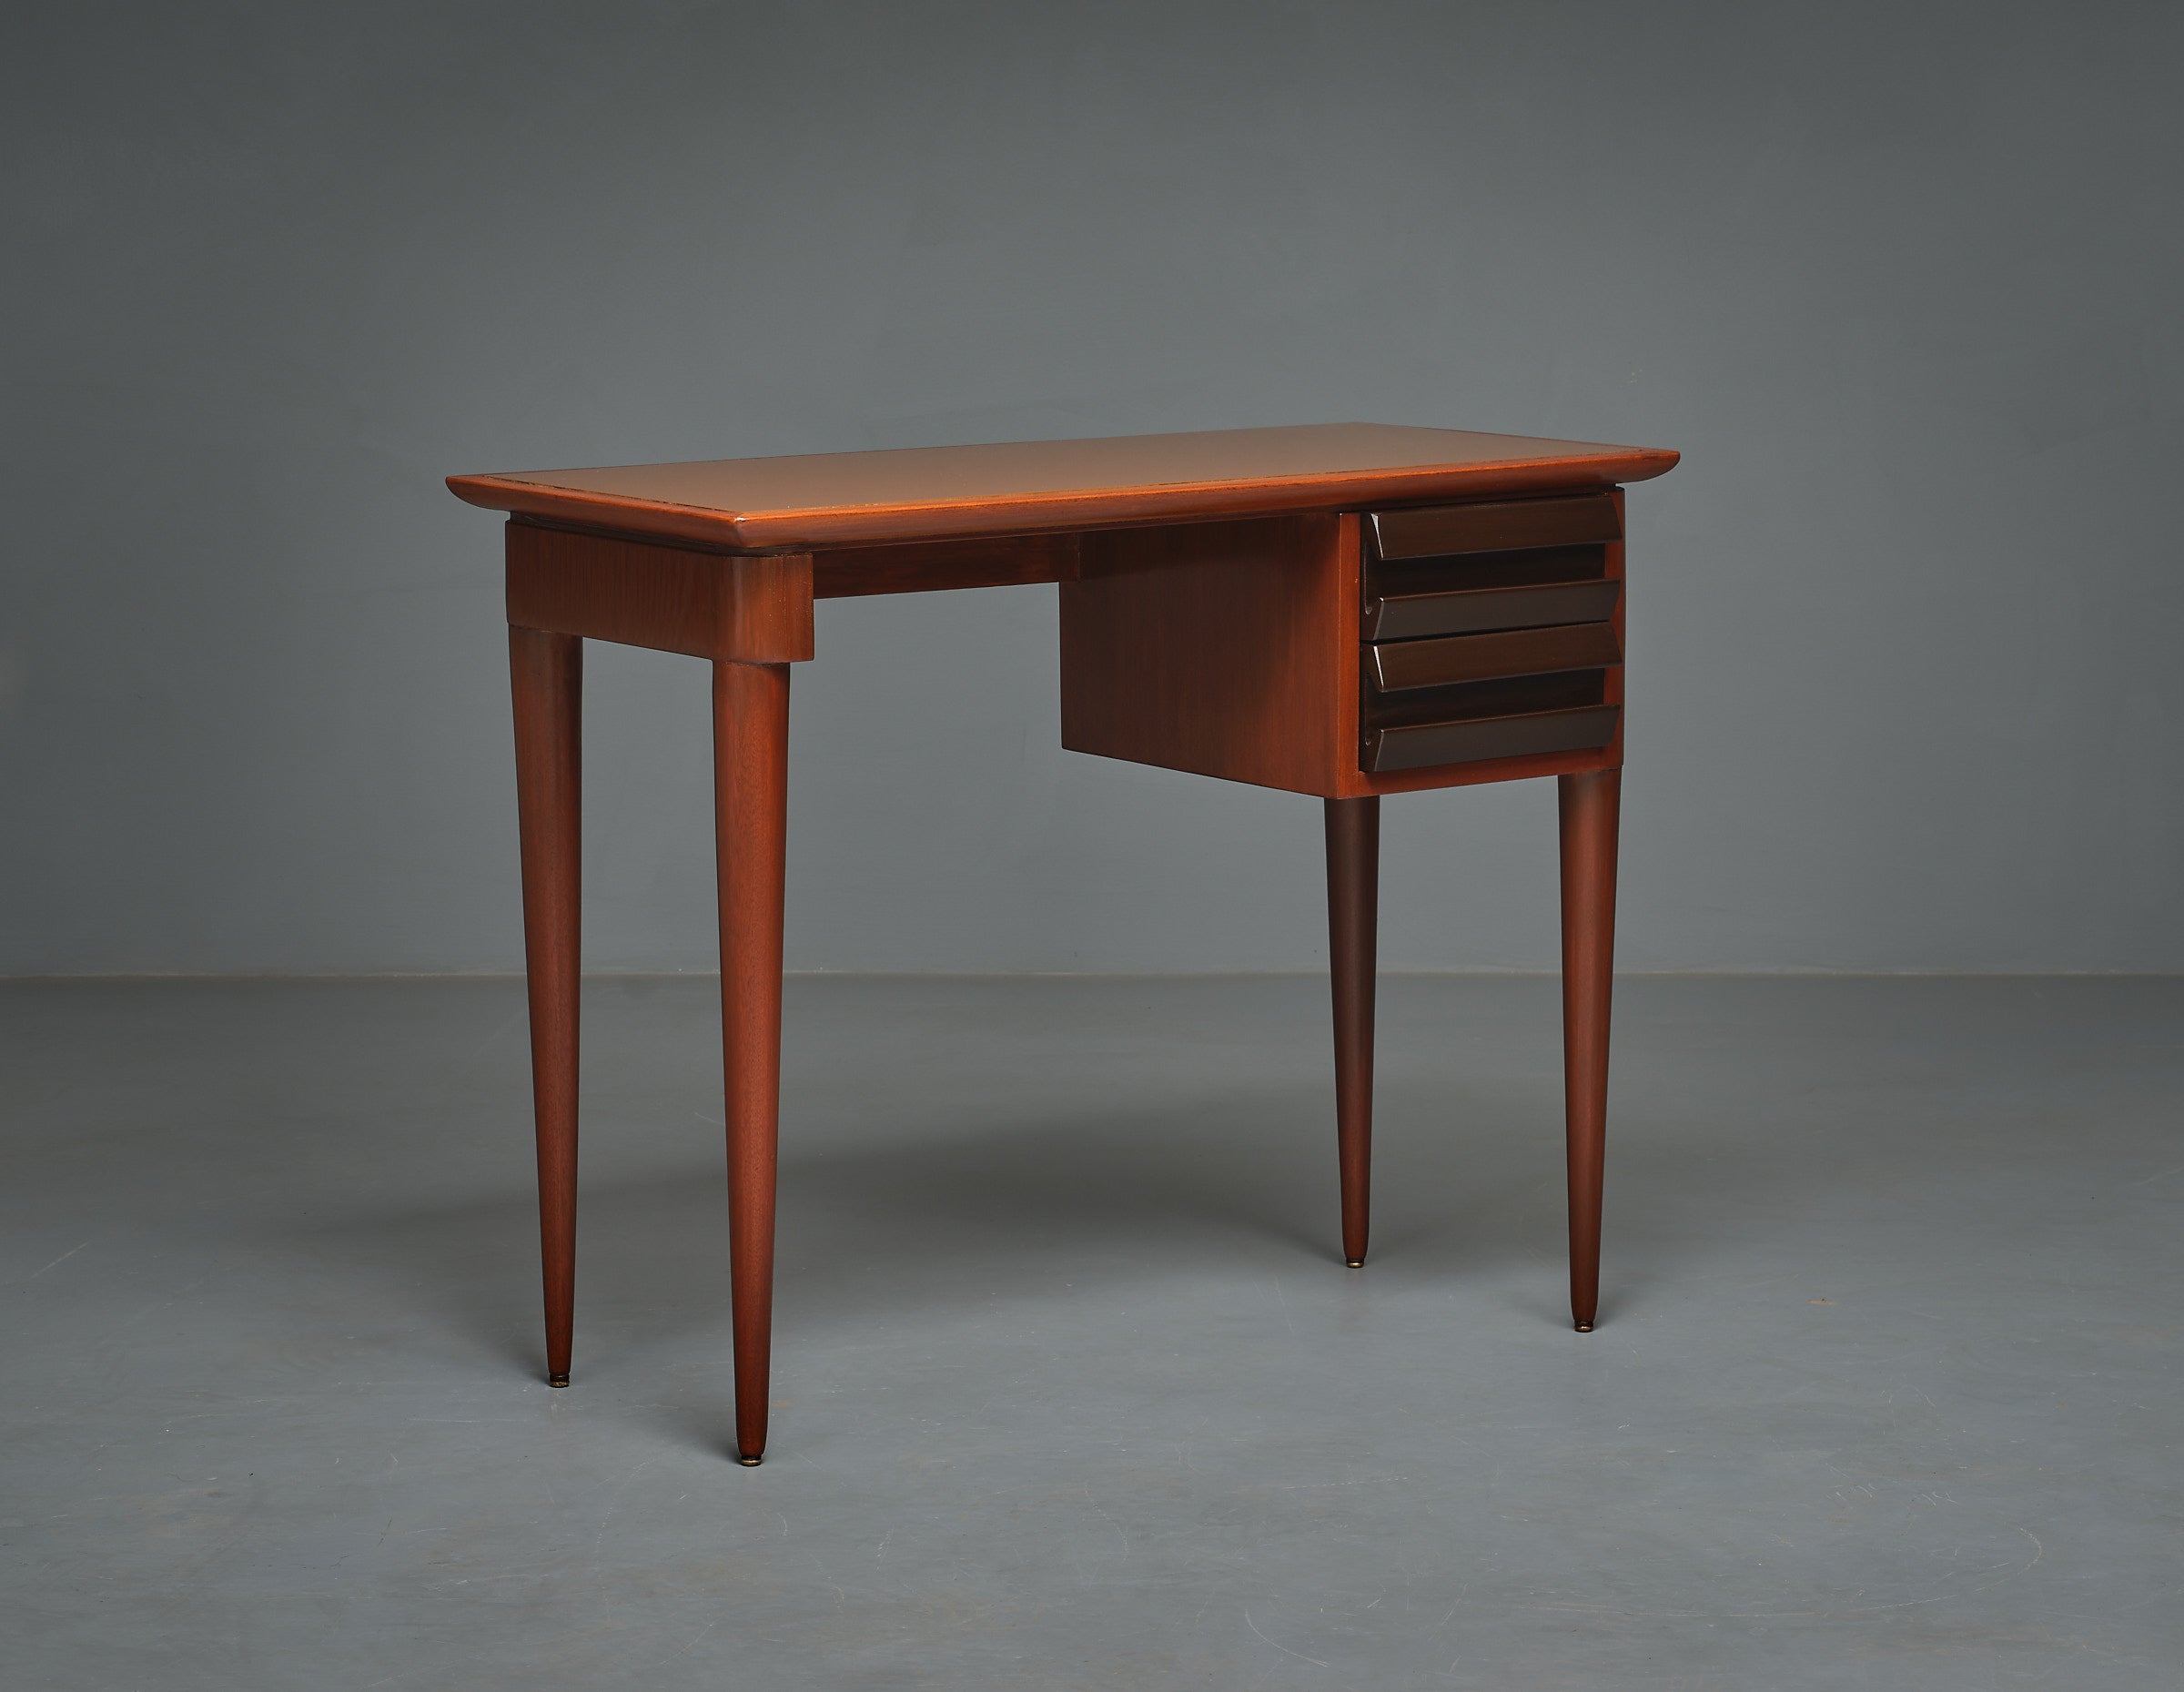 Presenting a  1950s Italian desk, a masterpiece of modern design attributed to Vittorio Dassi. Crafted with precision in high-quality Italian cabinetry, this desk seamlessly blends the sophistication of Italian craftsmanship with a sleek, modern